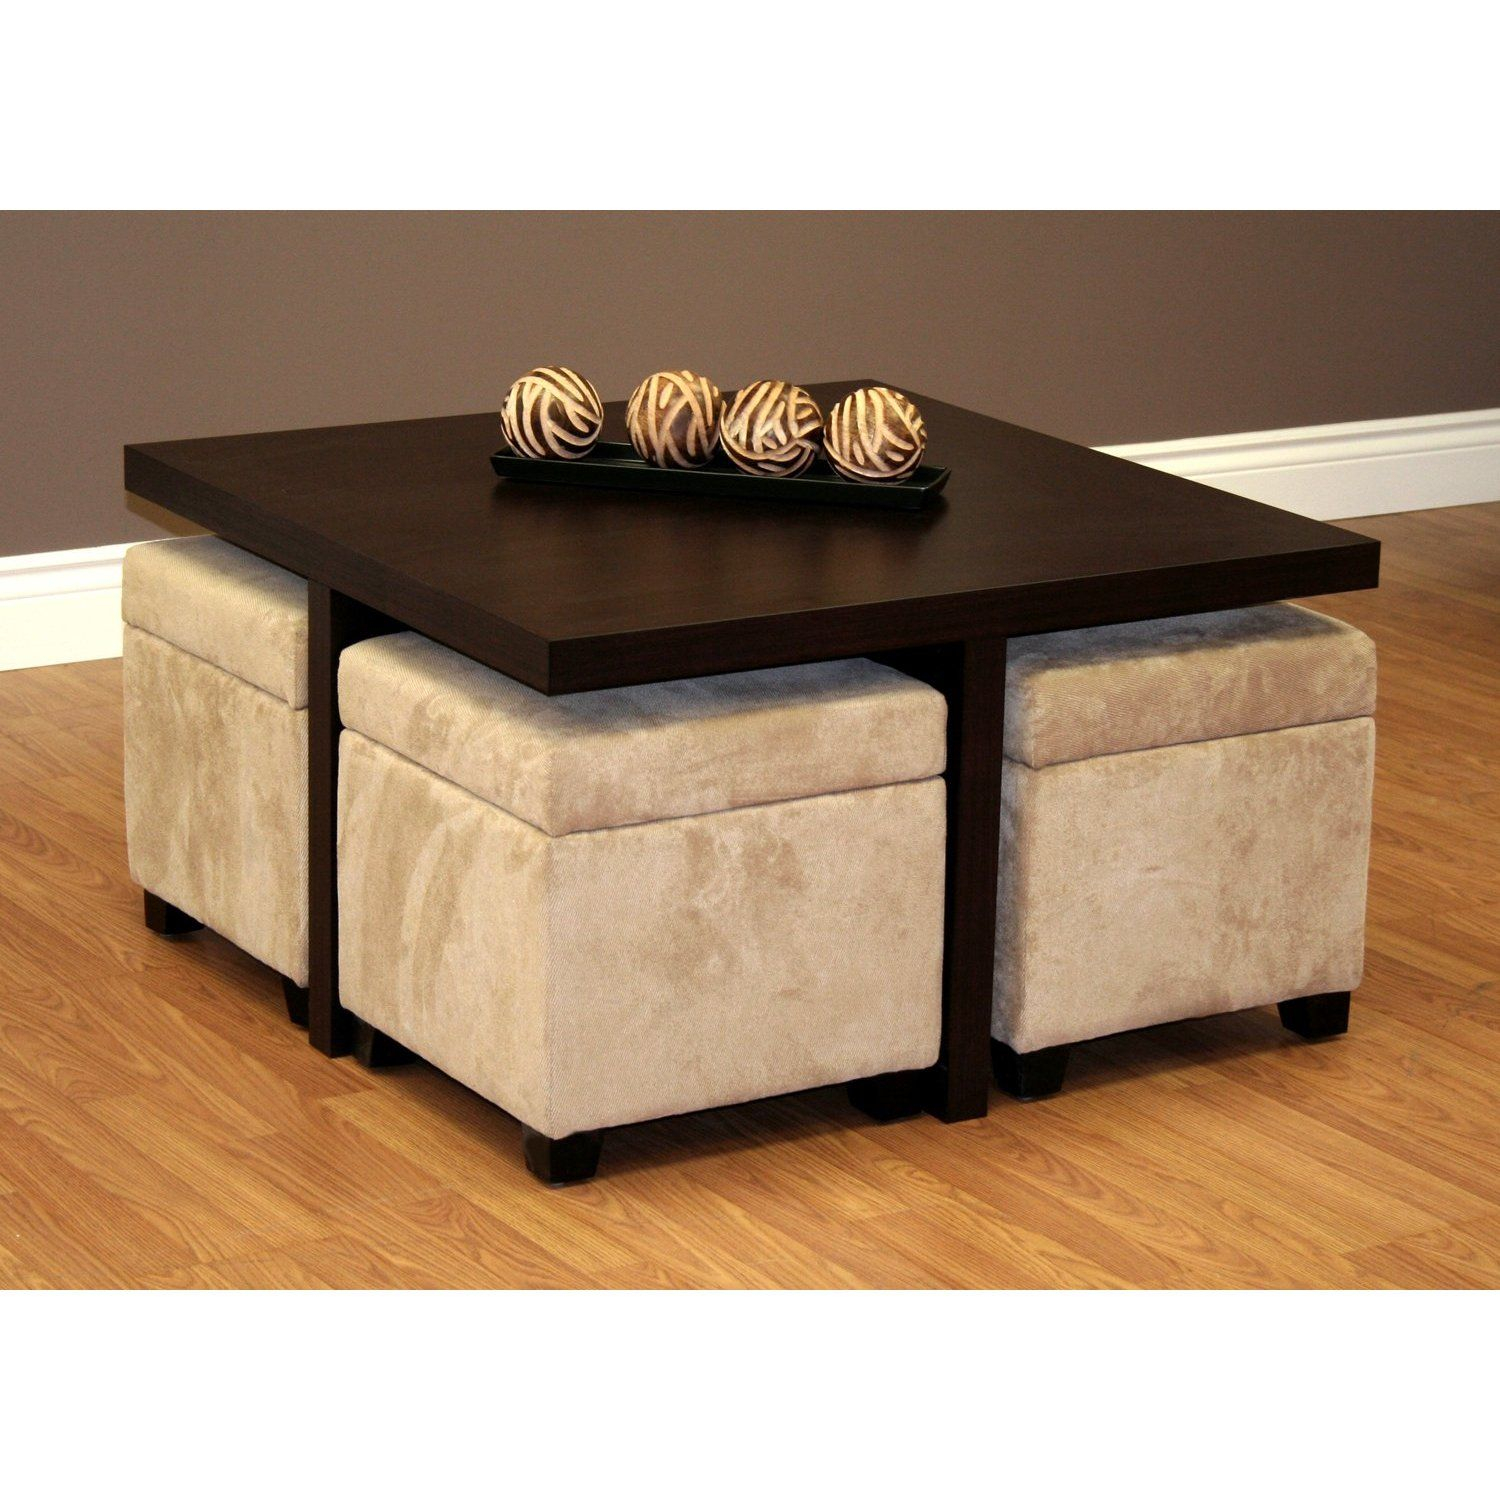 Beautiful Coffee Table With Ottoman Seating I Love This Look I with sizing 1500 X 1500